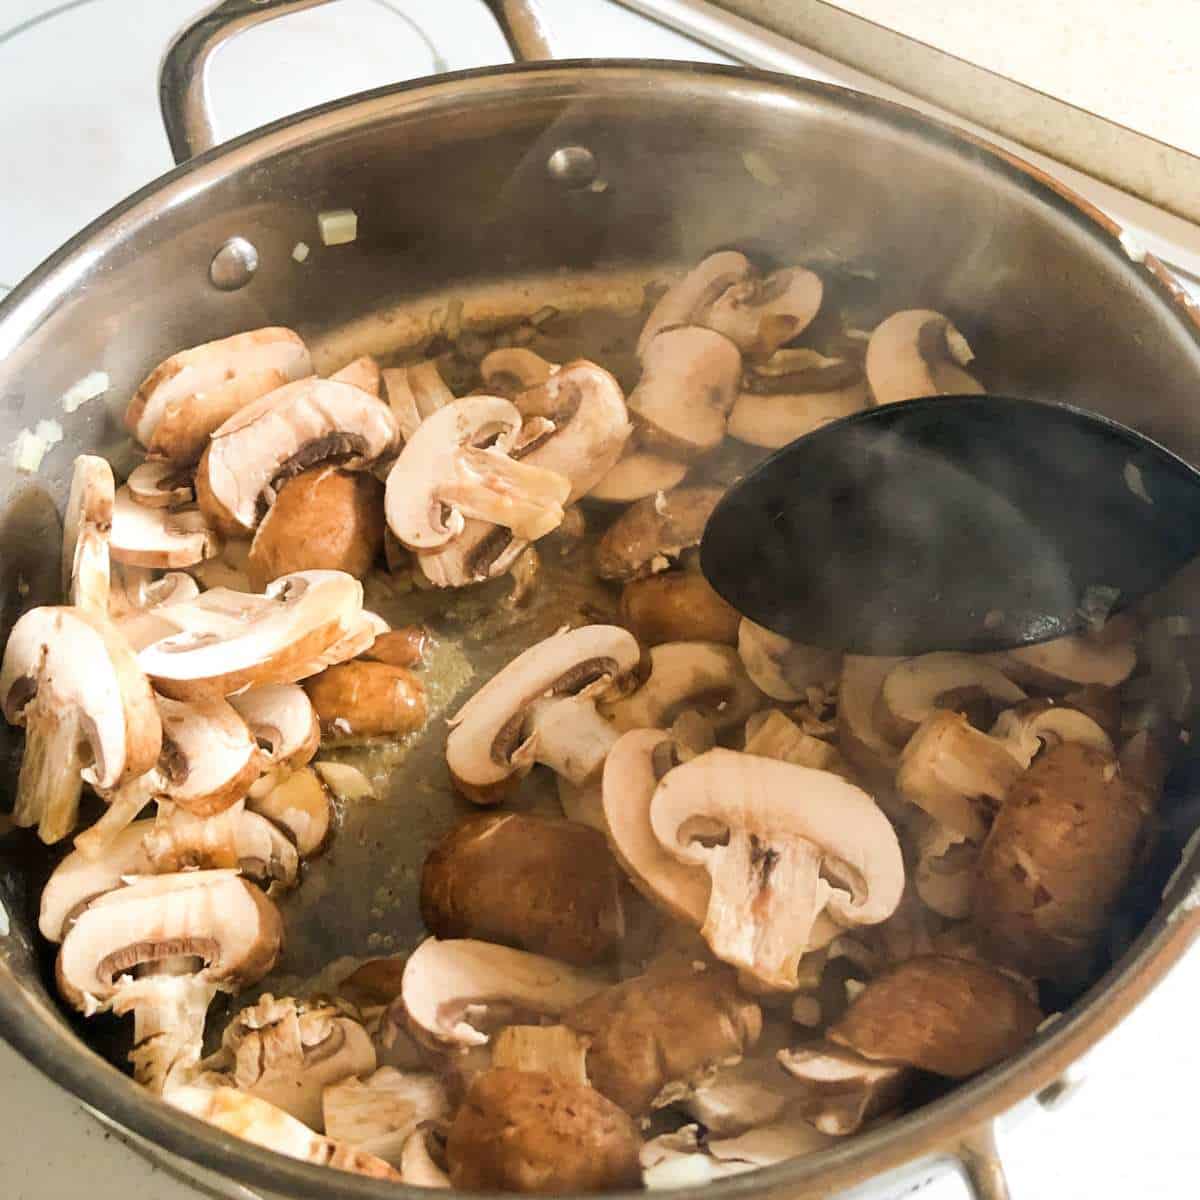 Sliced mushrooms being sauteed in dairy free butter